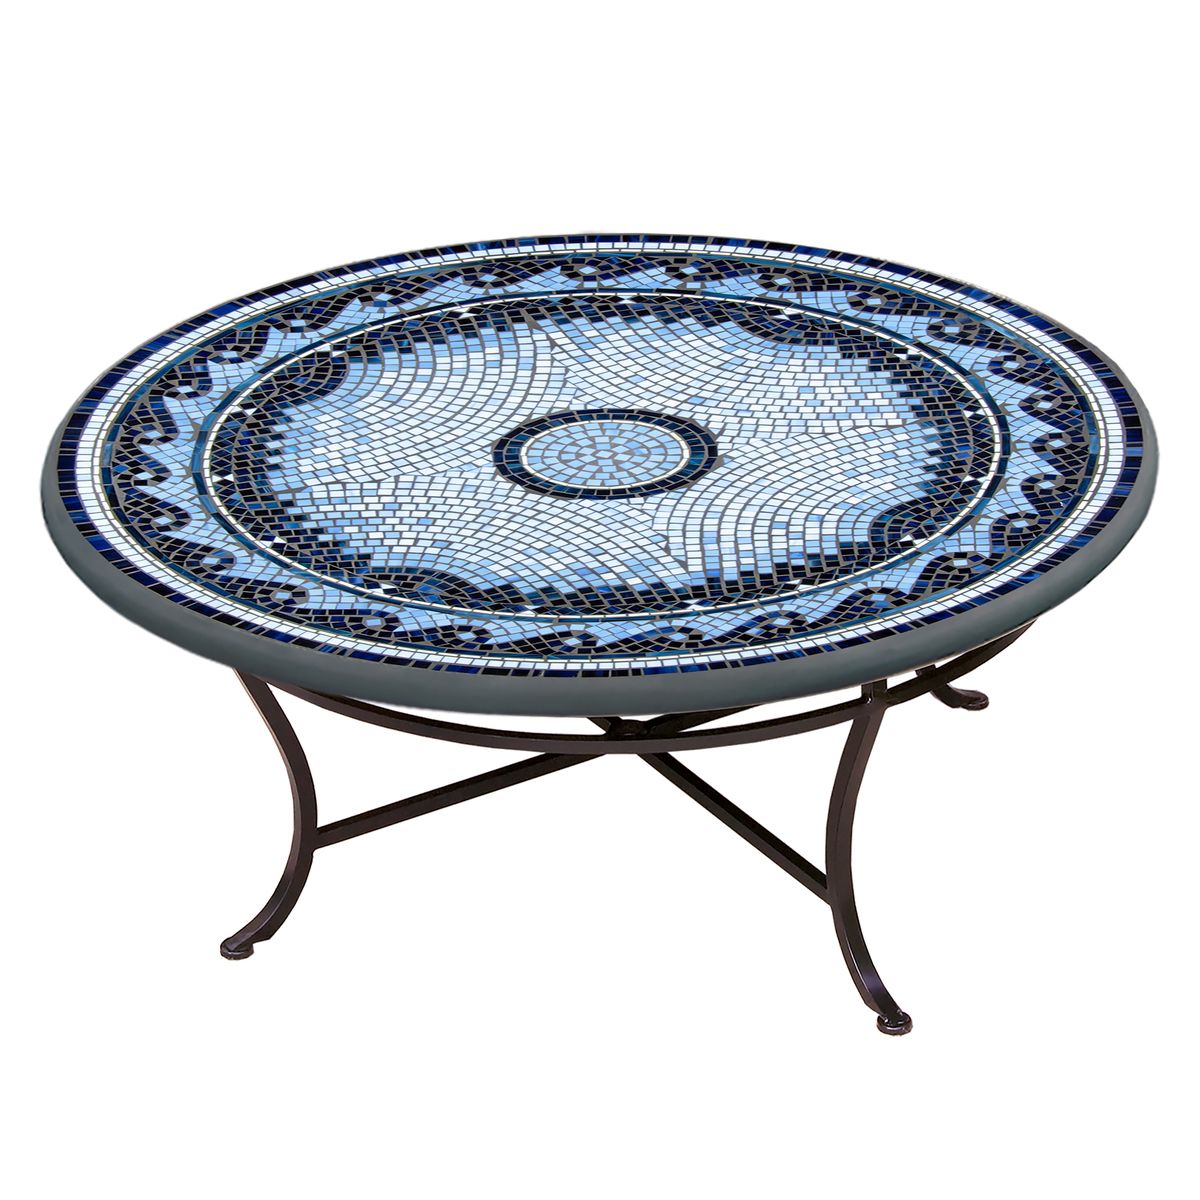 Navagio Mosaic Coffee Table-Iron Accents